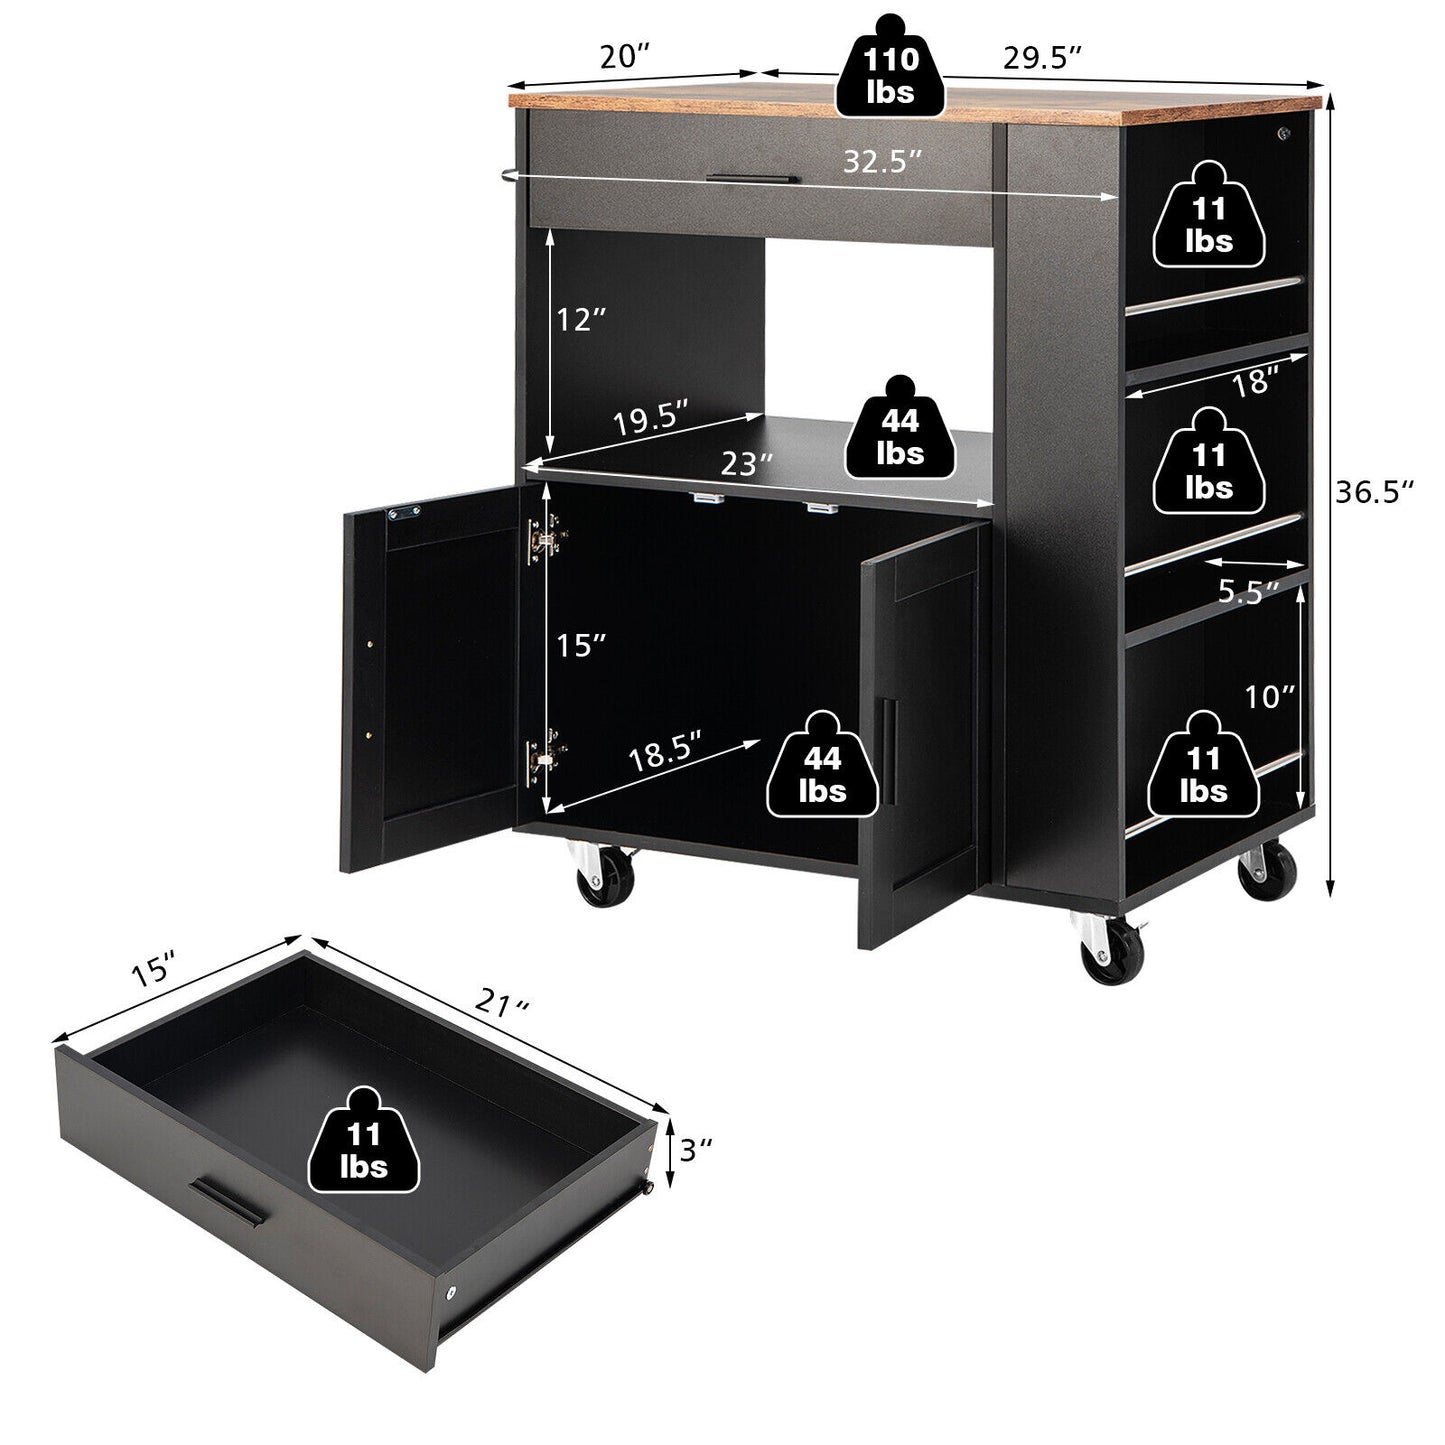 Kitchen Island Cart Rolling Storage Cabinet with Drawer and Spice Rack Shelf-Black